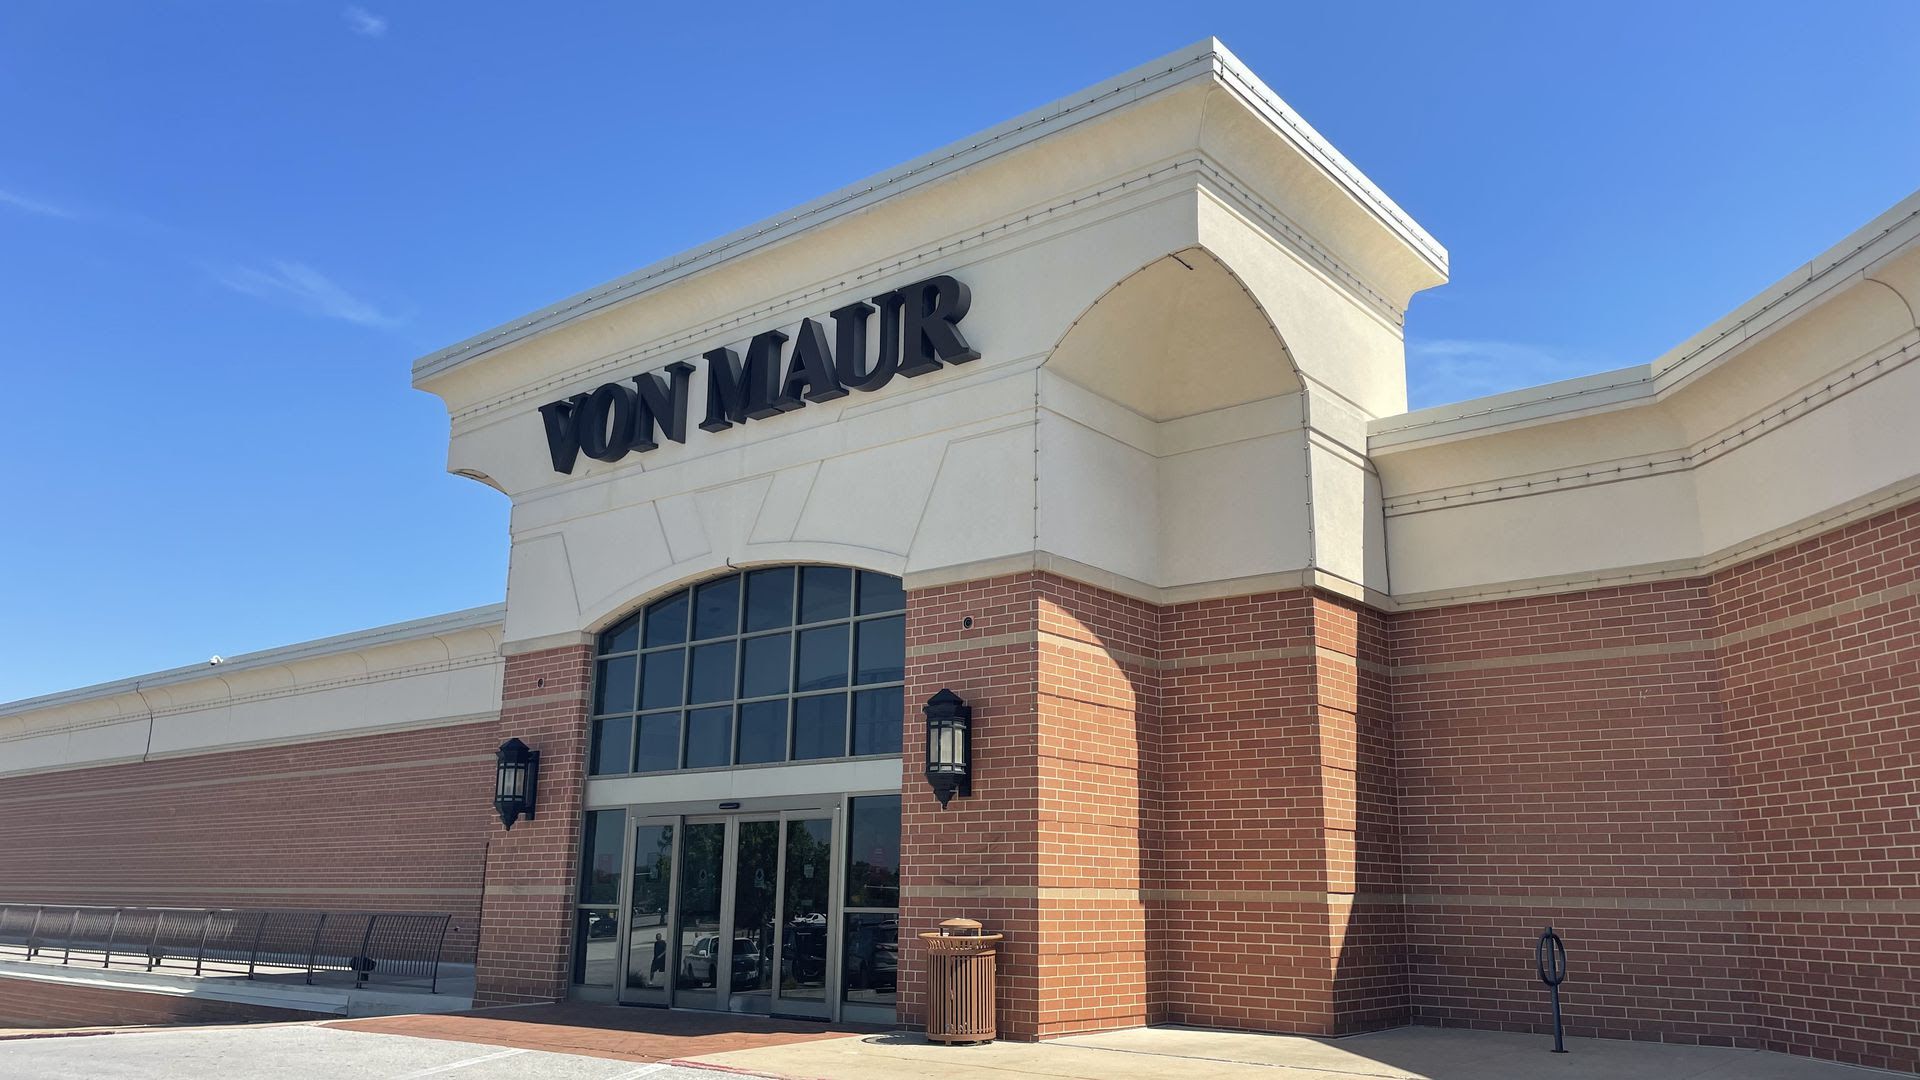 Von Maur closes its Valley West location ahead of move to Jordan Creek